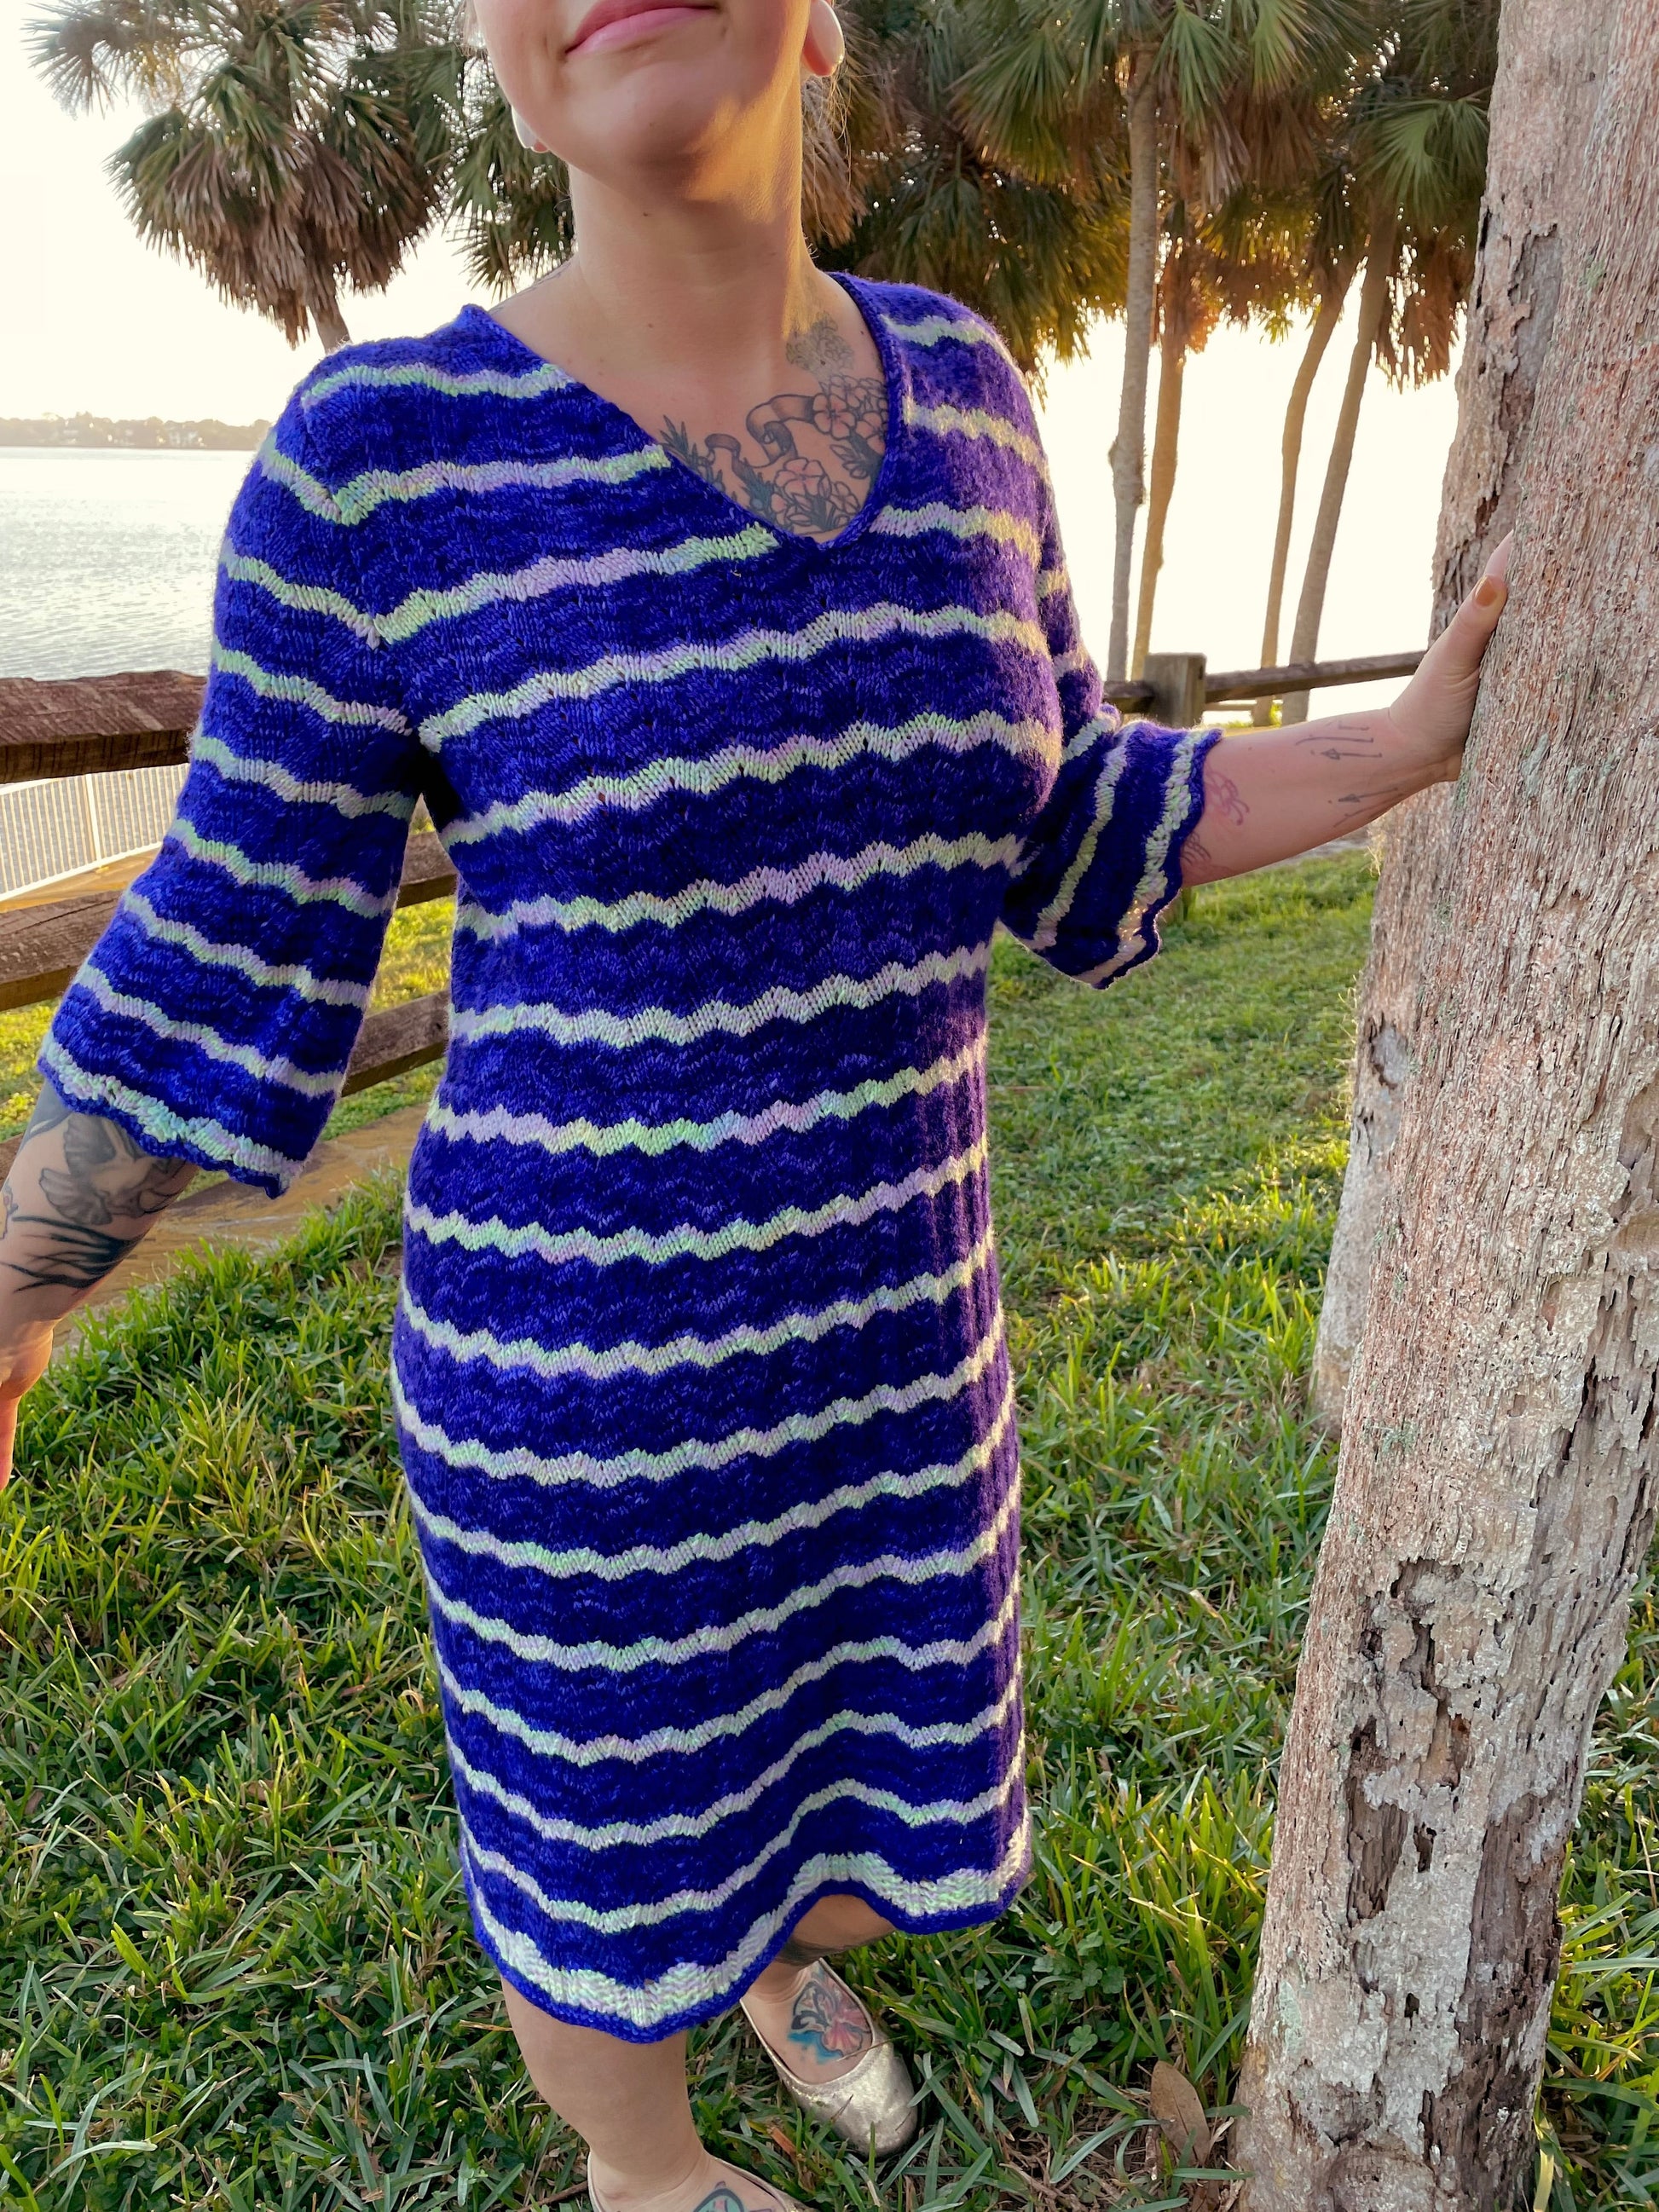 Seen from the neck down, Bess wears a lace knit dress, made with blue and white stripes and a gentle V-neckline. Palm trees can be seen in the background.